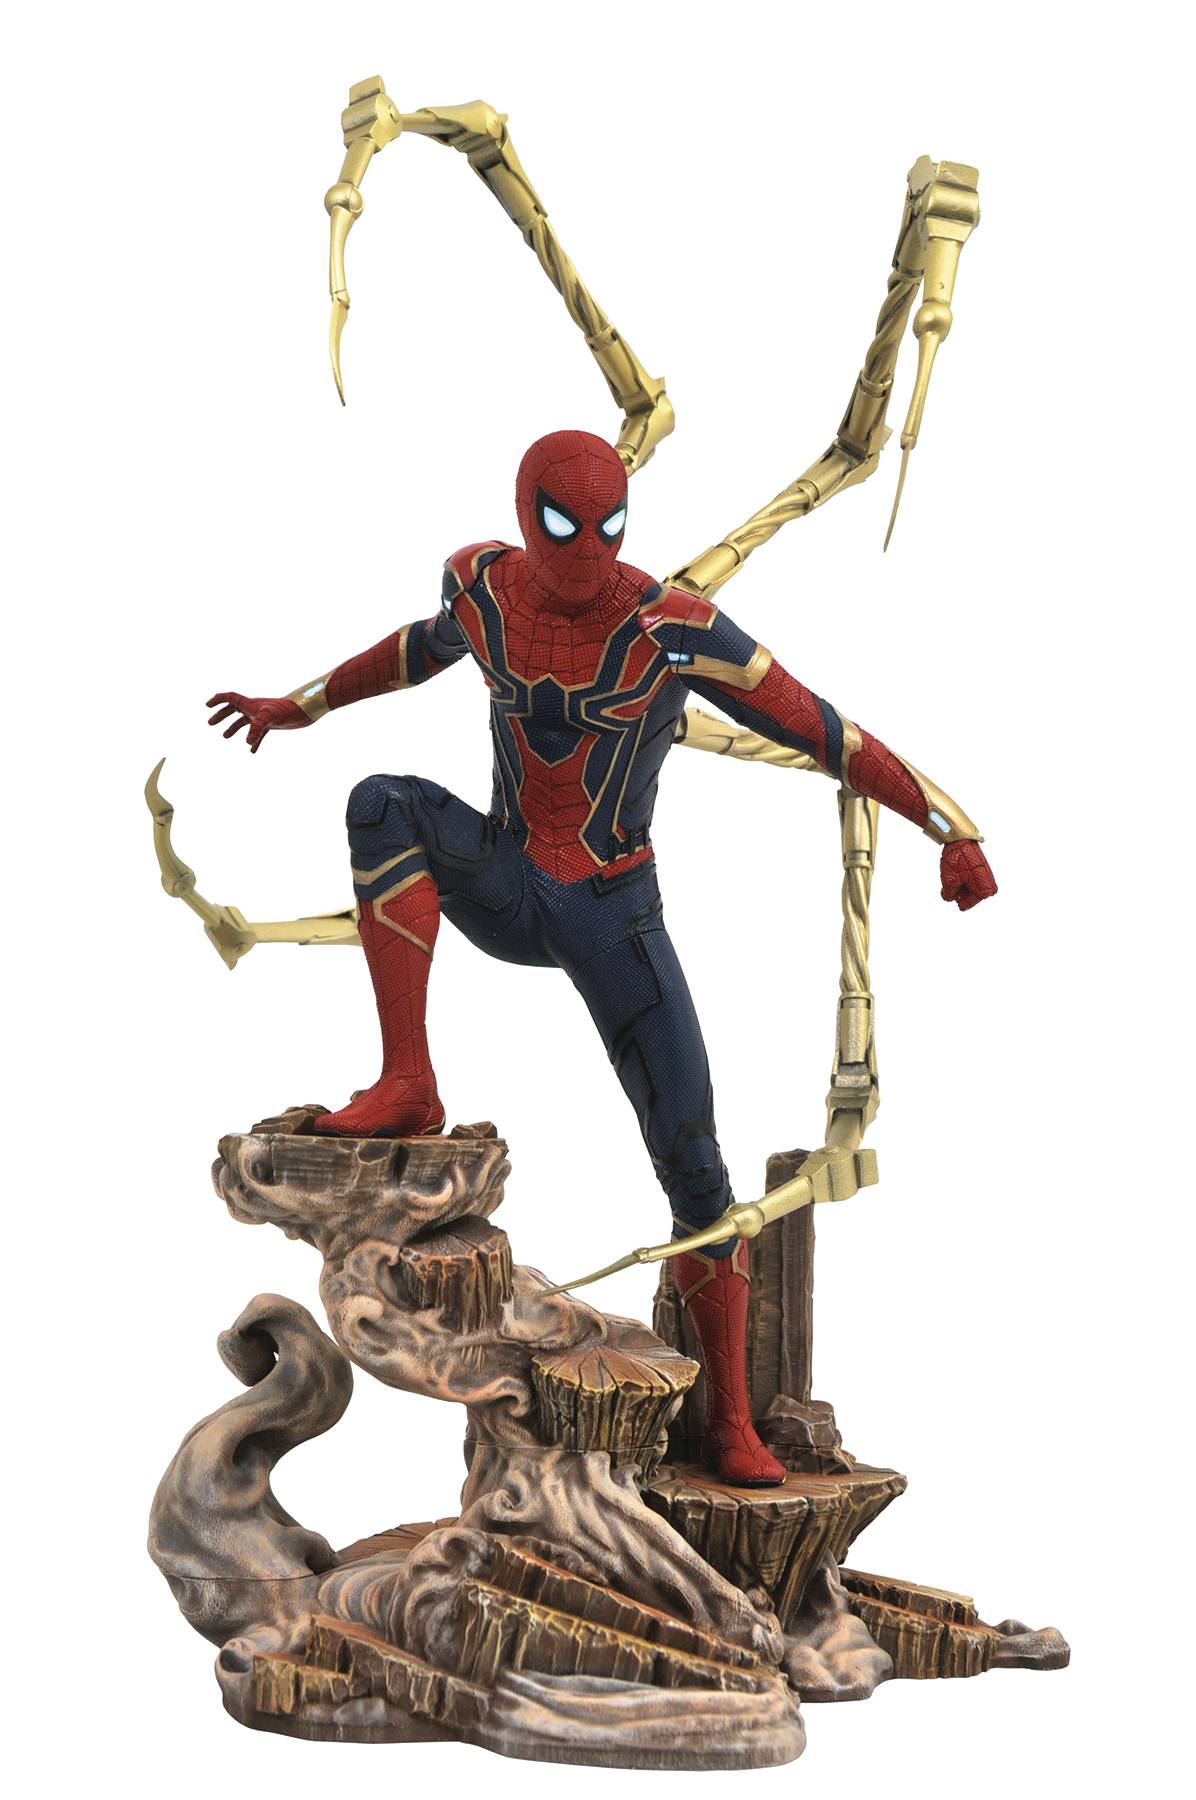 Load image into Gallery viewer, Stock photo of The Iron Spider Spider-Man Gallery Statue by Diamond Select Toys. Spider-Man is posed on a rock formation in his Iron-Spider suit as seen in Avengers: Infinity War
